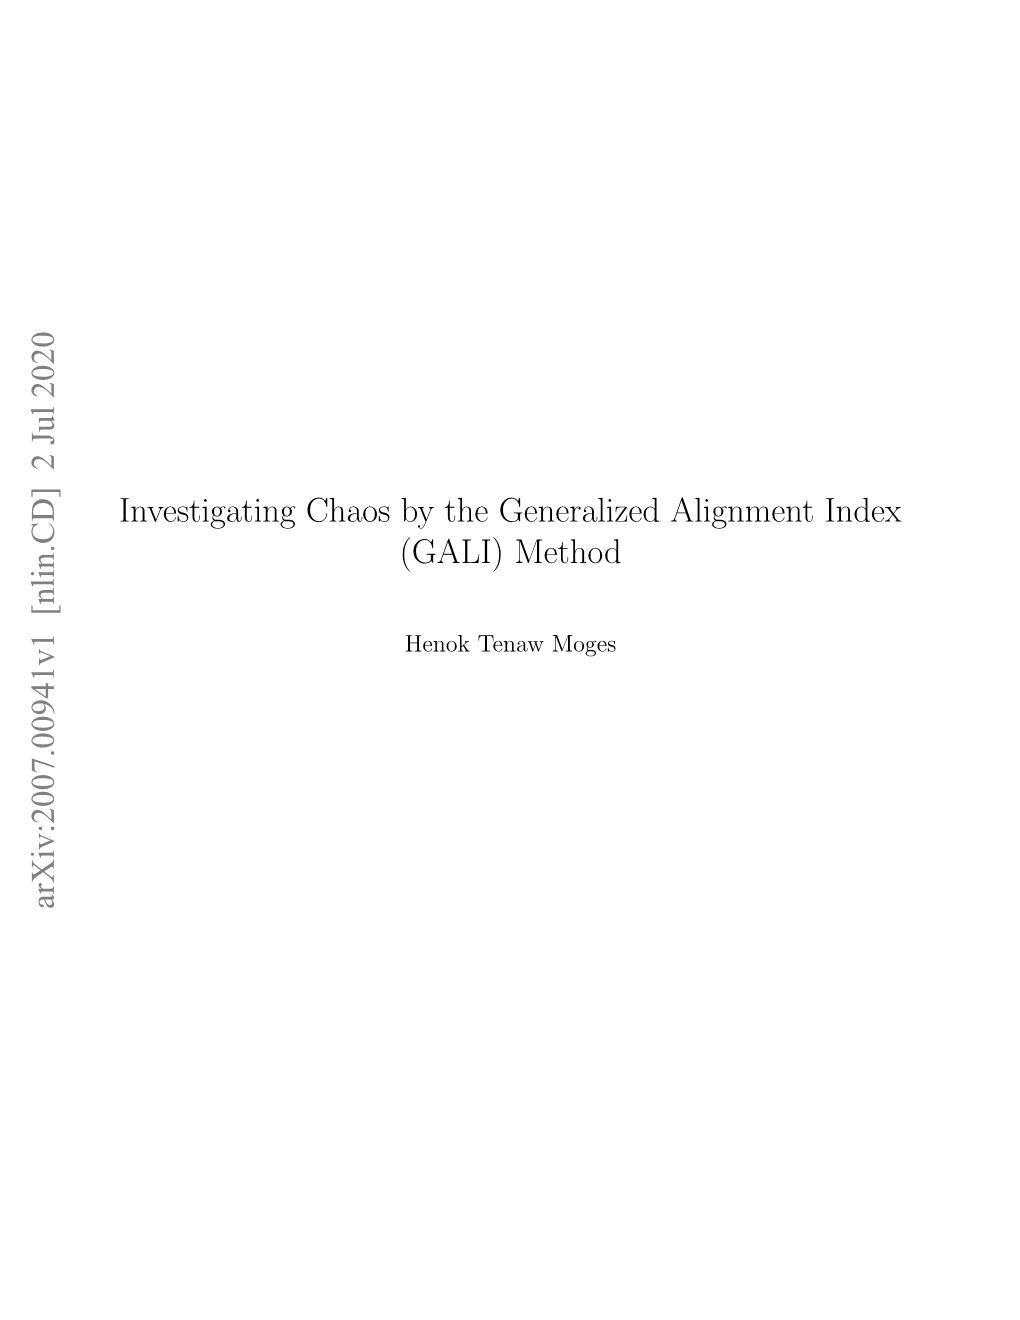 Investigating Chaos by the Generalized Alignment Index (GALI) Method